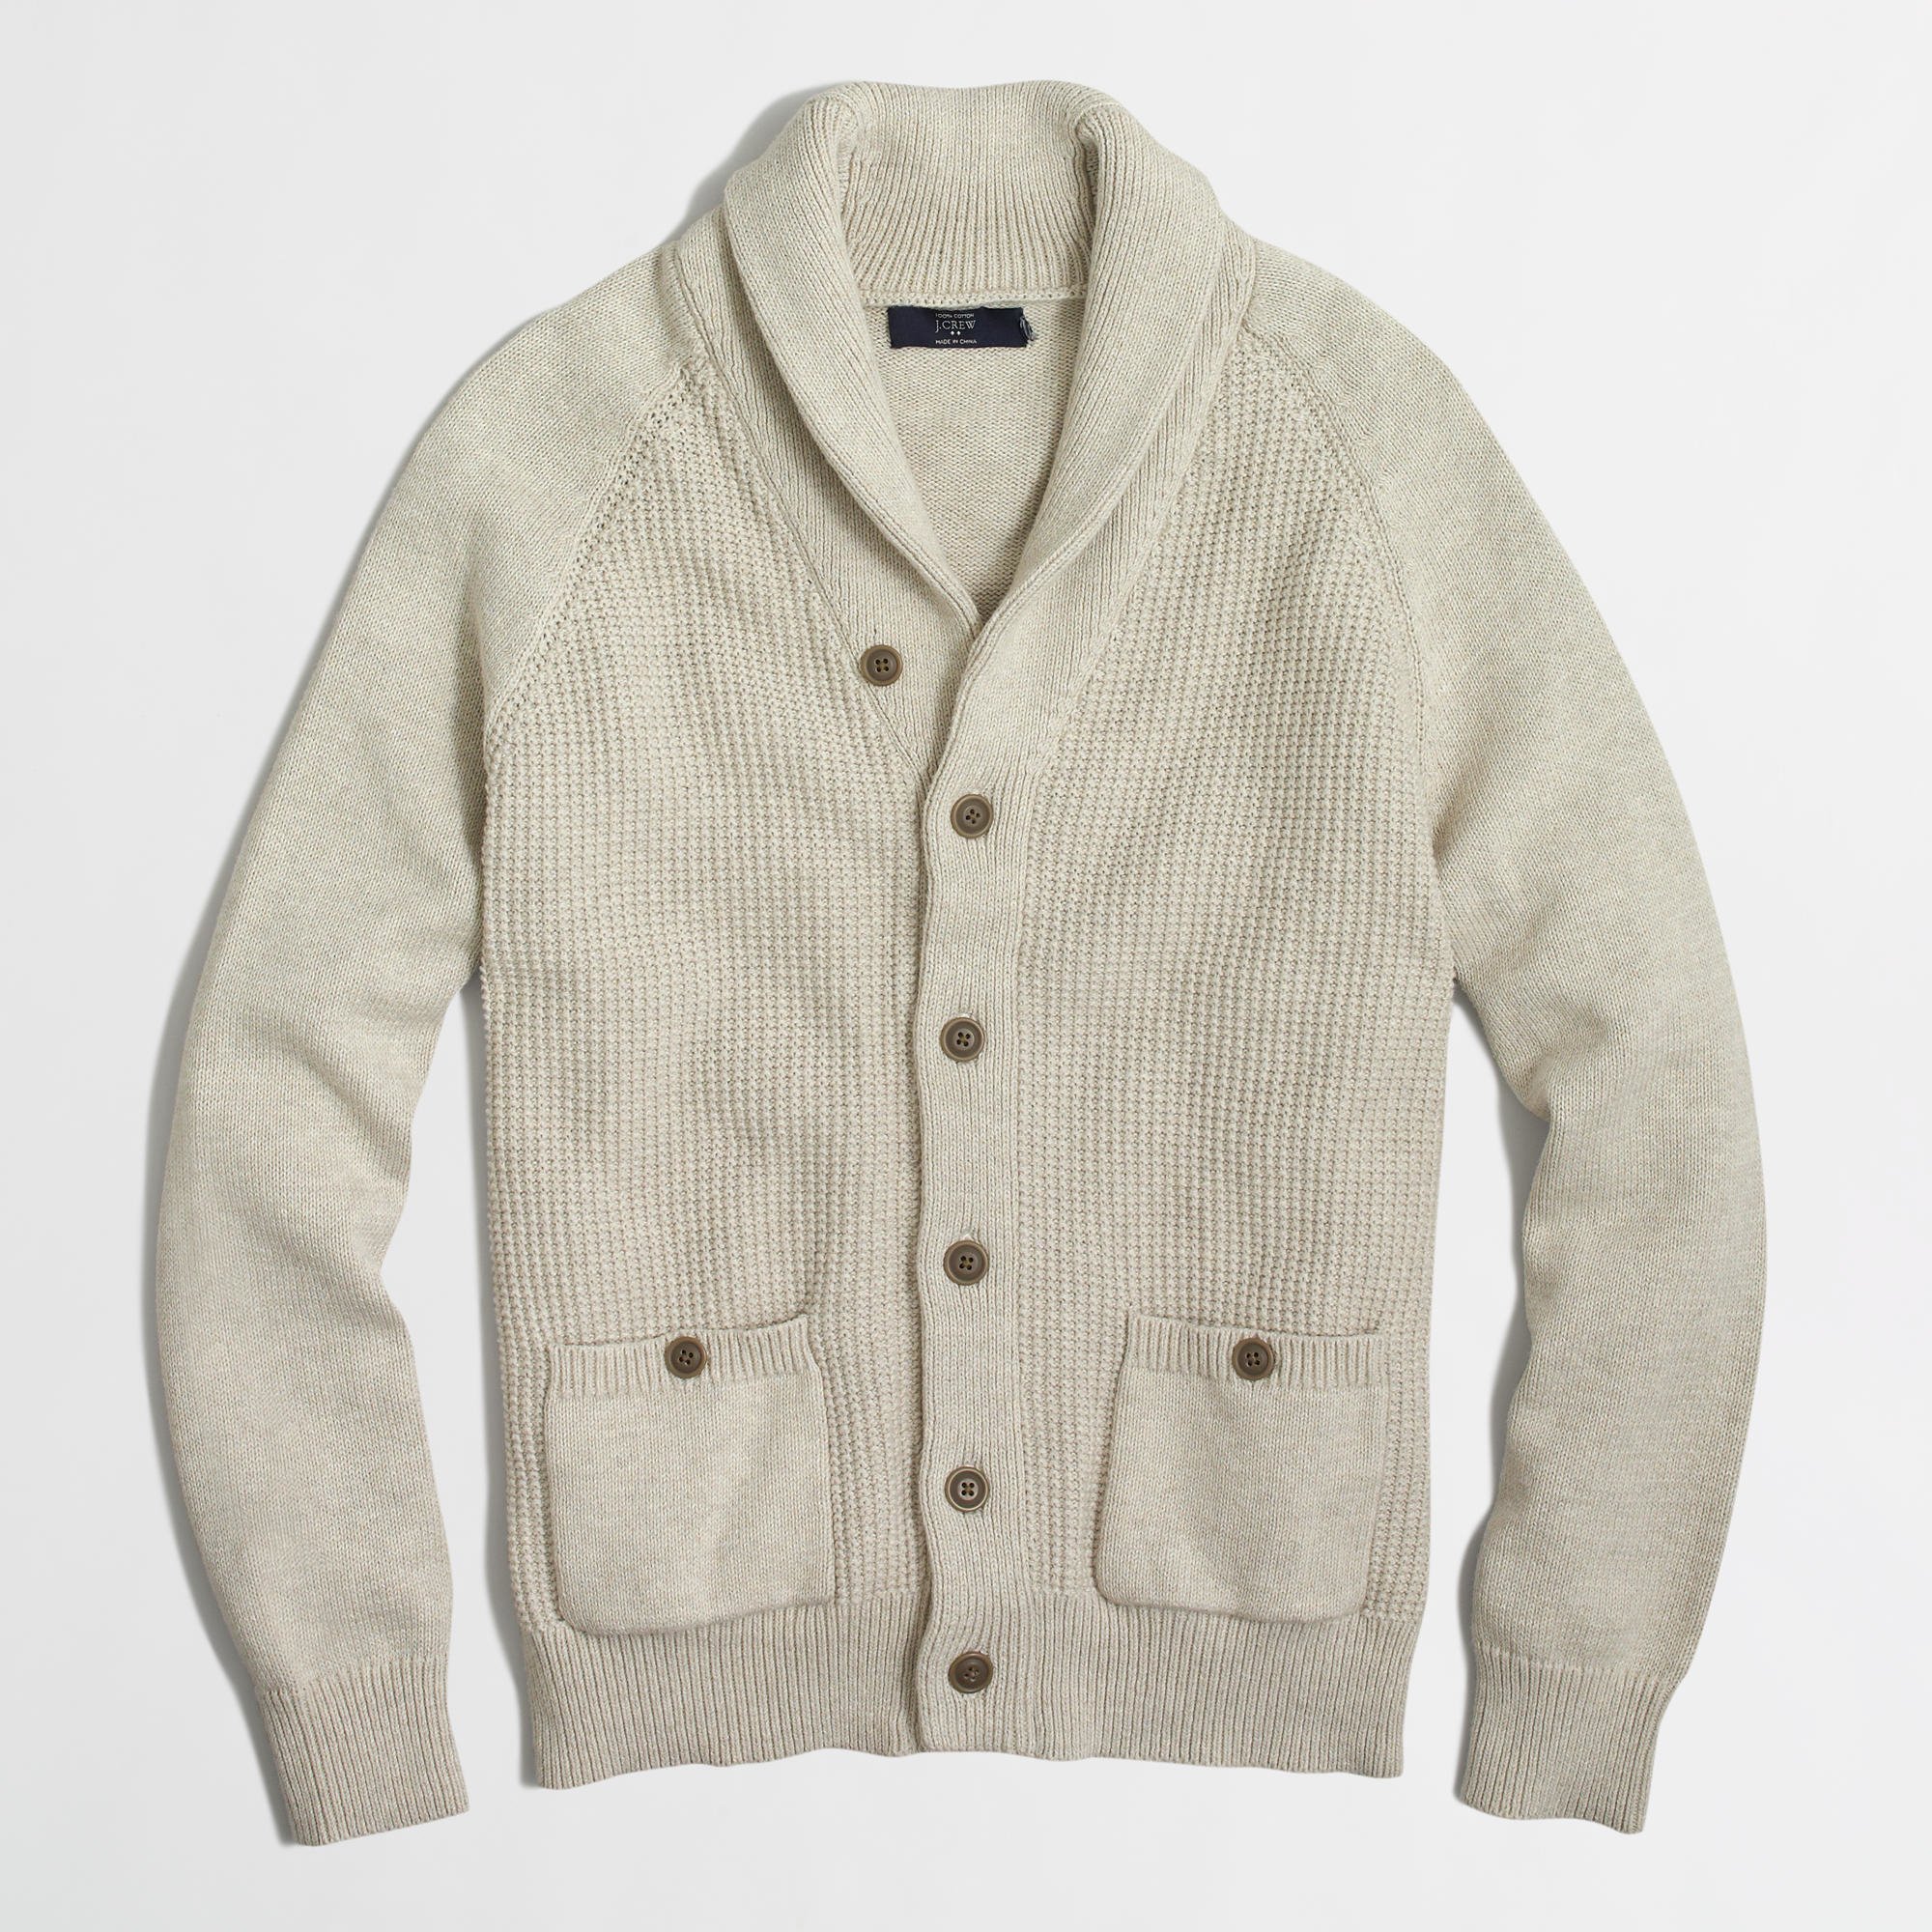 J.Crew Factory Cotton Shawl-Collar Cardigan Sweater in Gray for Men - Lyst